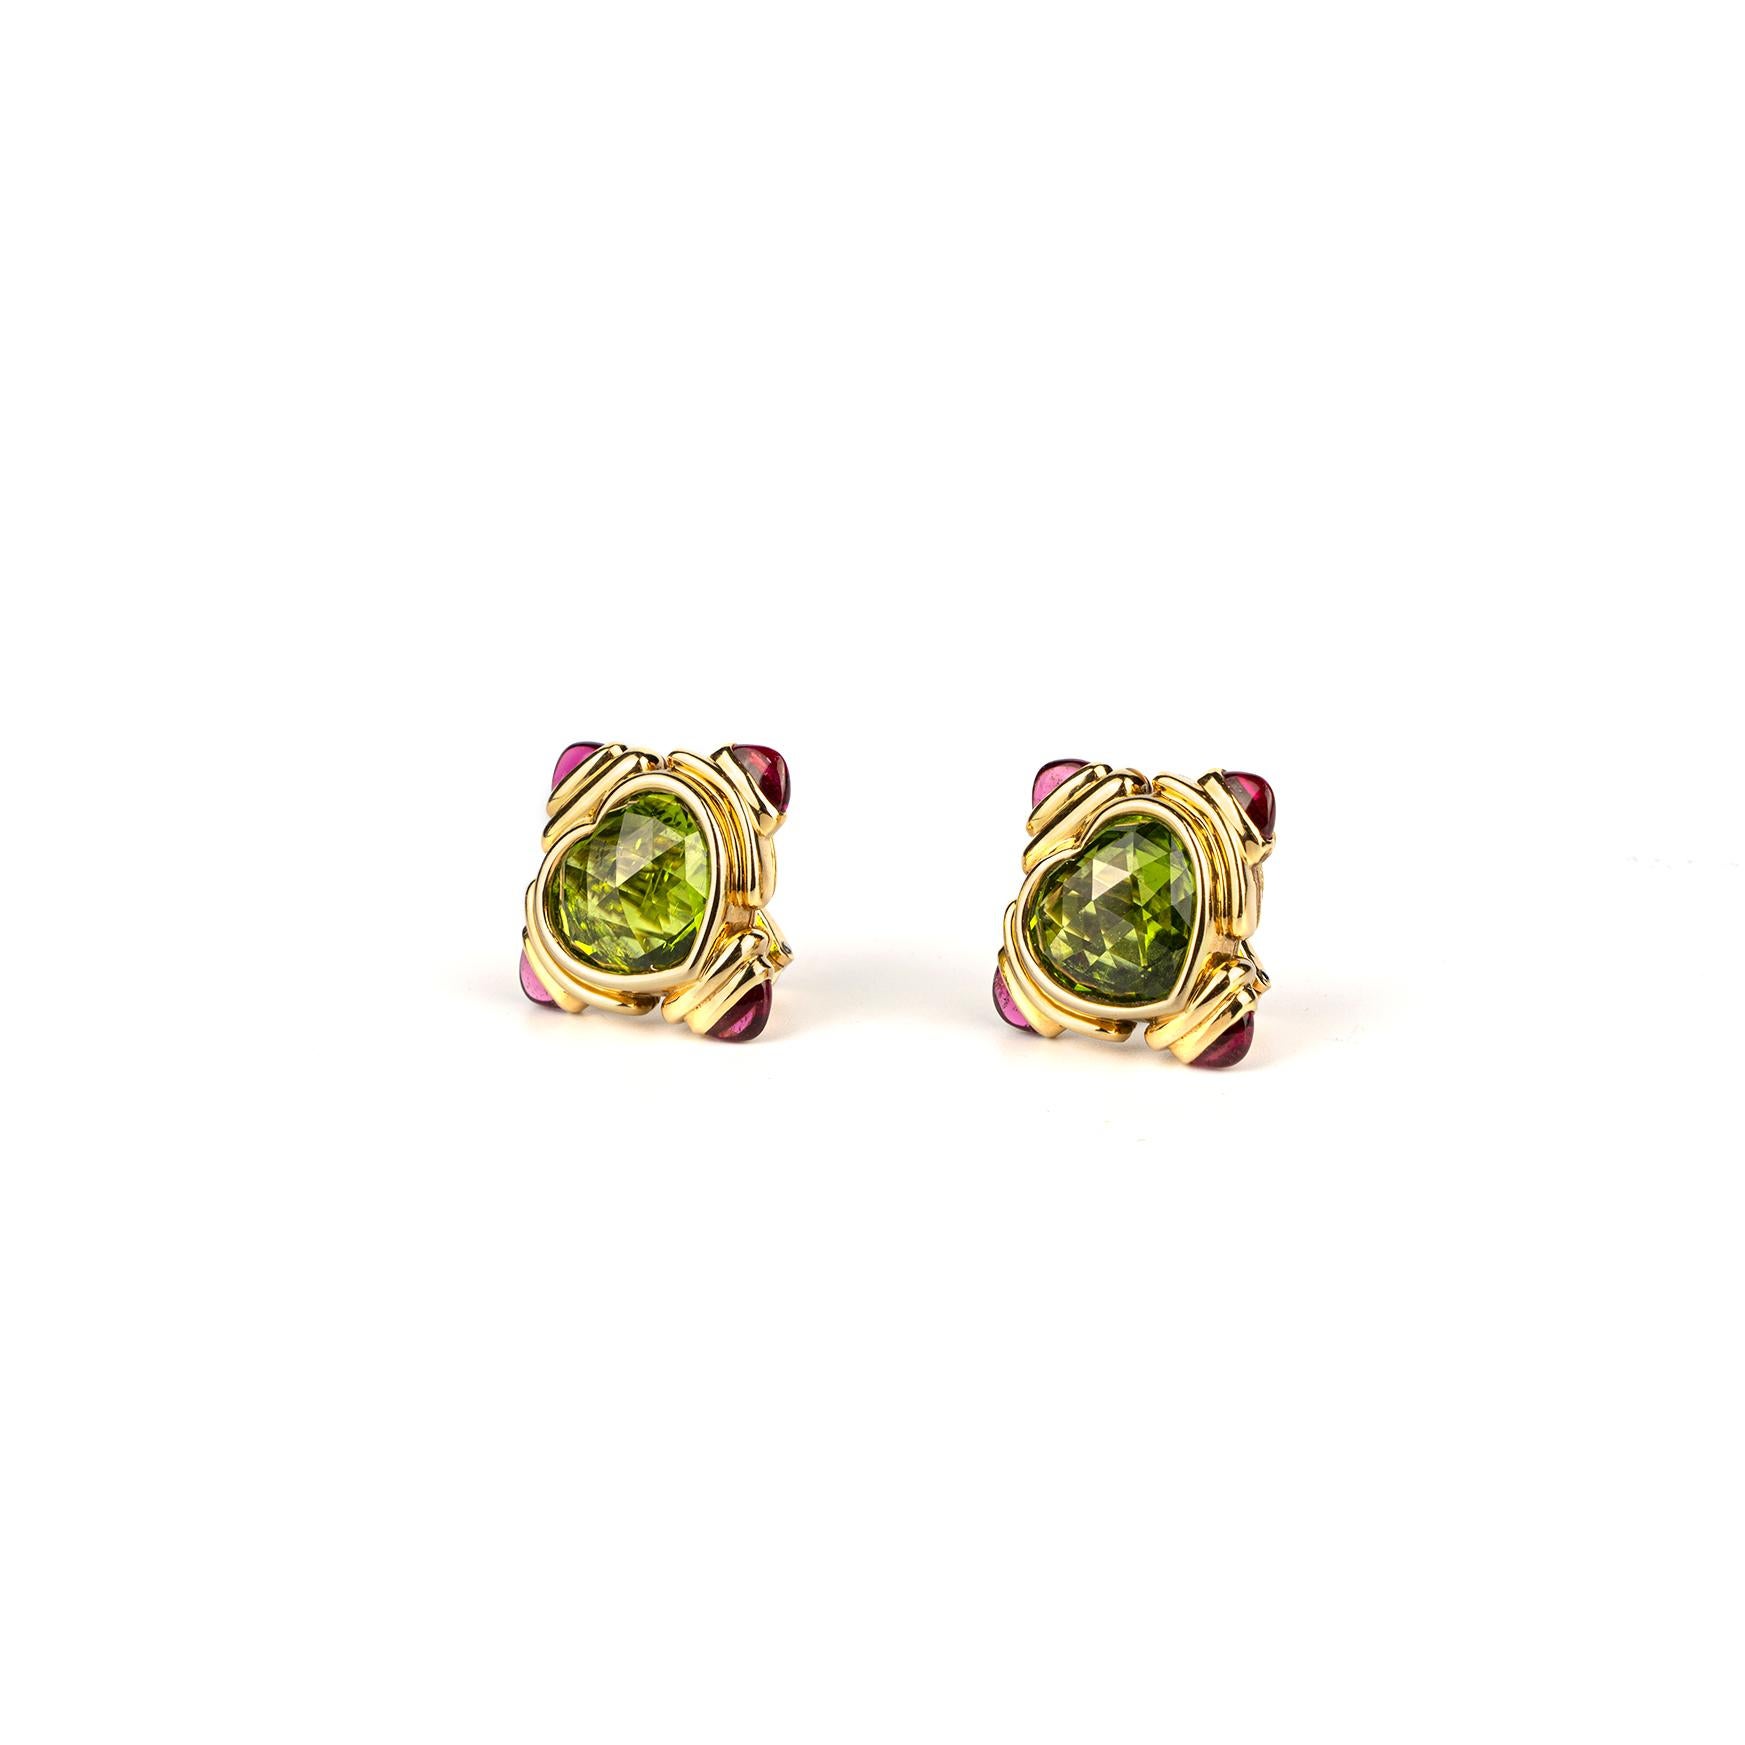 Vintage Bulgari 18k Gold Heart Shaped Peridot and Cabochon Tourmaline Earrings In Excellent Condition For Sale In New York, NY